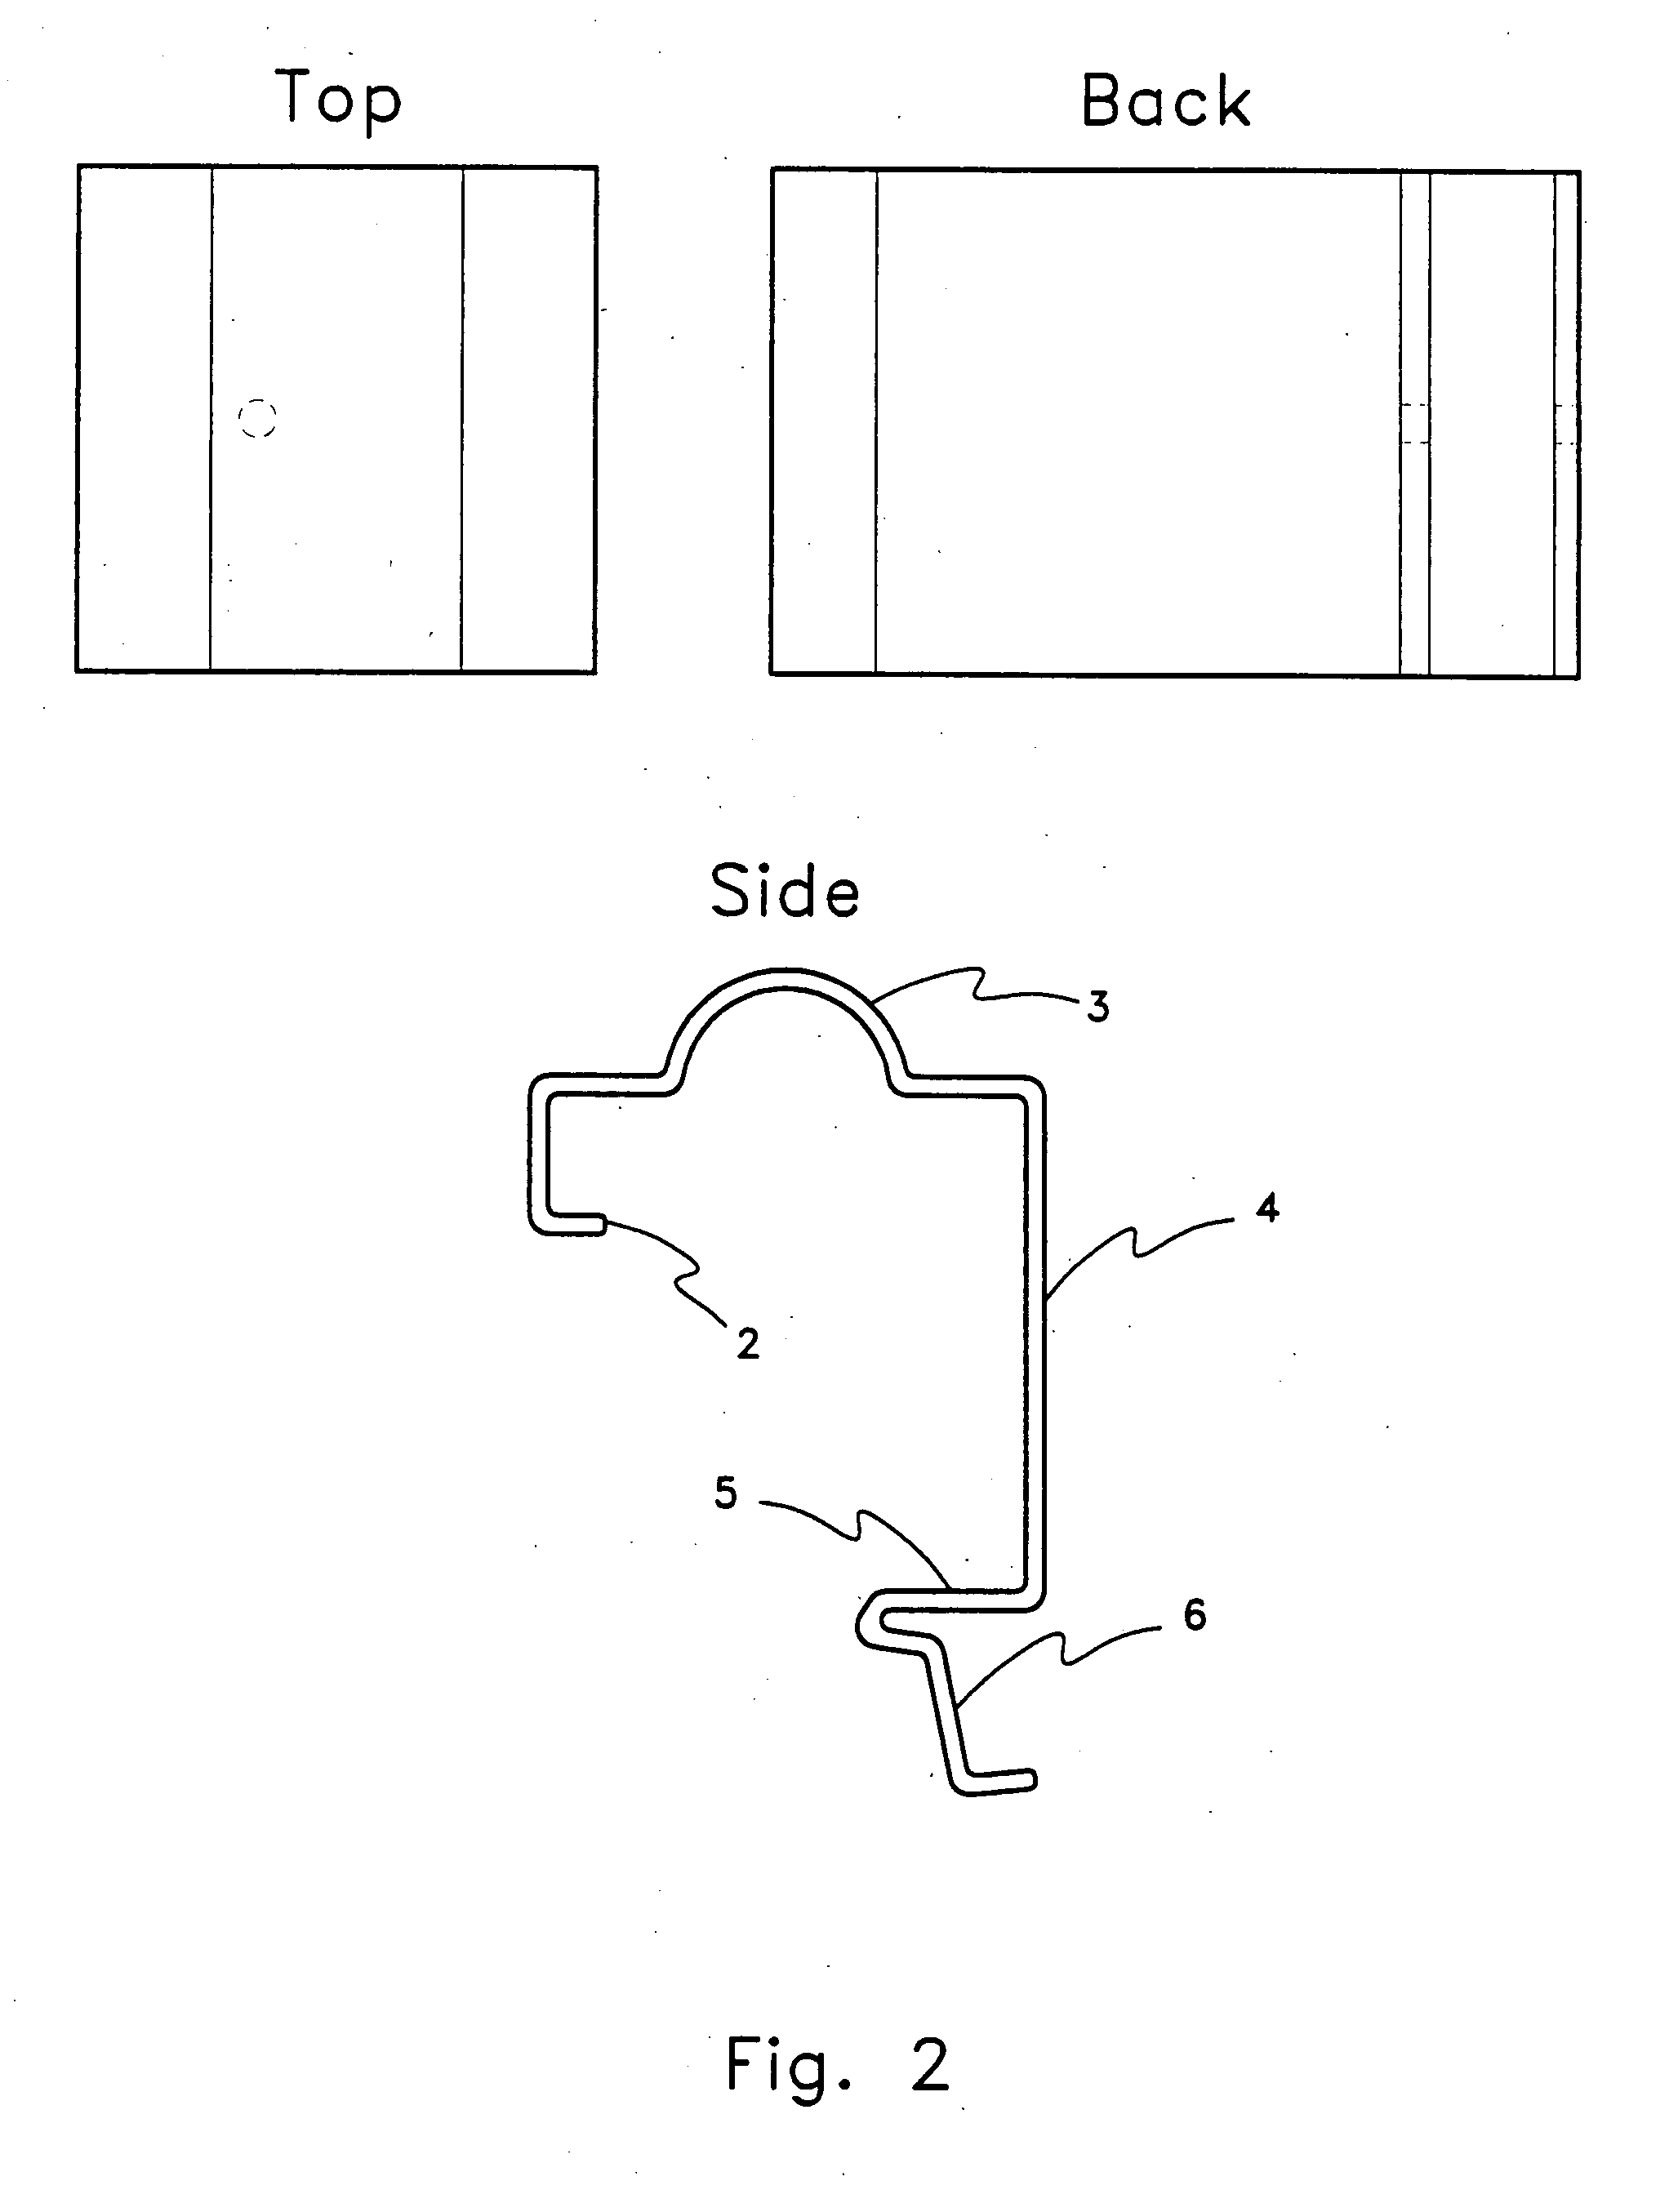 Systems for safe securement of saddle items to electrical structures